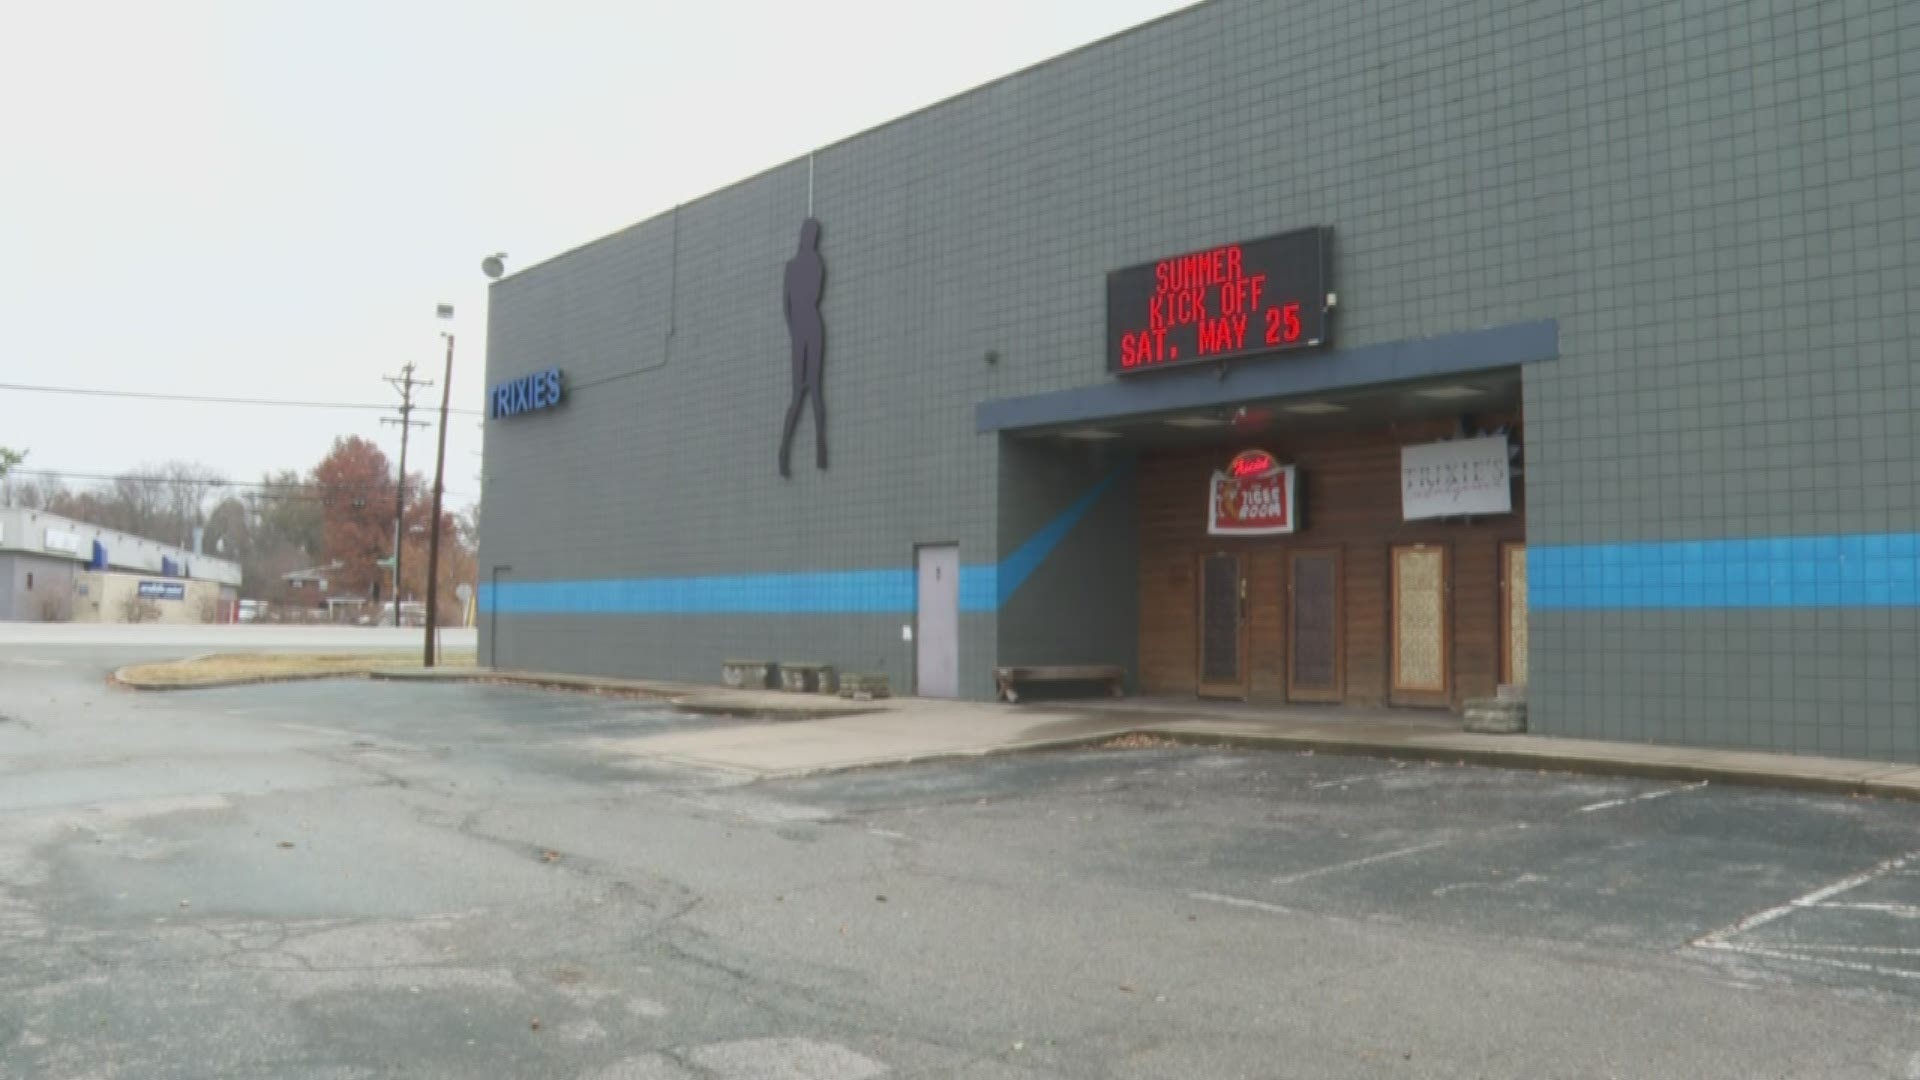 The building on Preston Highway was sold at auction on November 21 for $522,509.